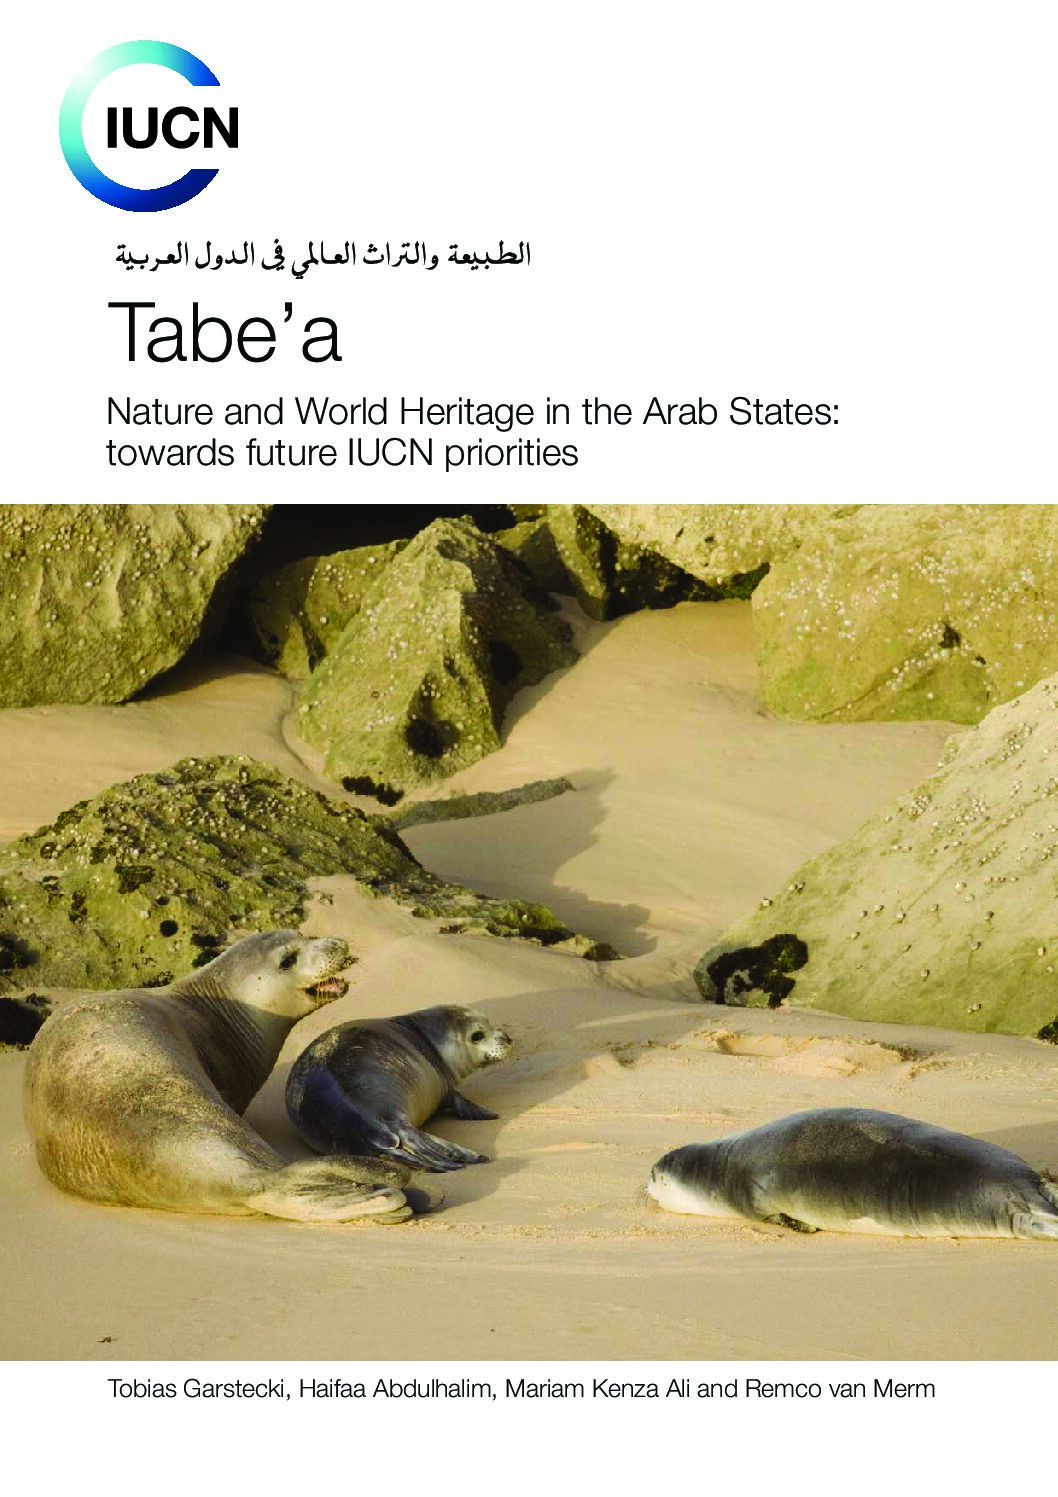 Tabe'a Nature and World Heritage in the Arab States: Towards Future IUCN priorities